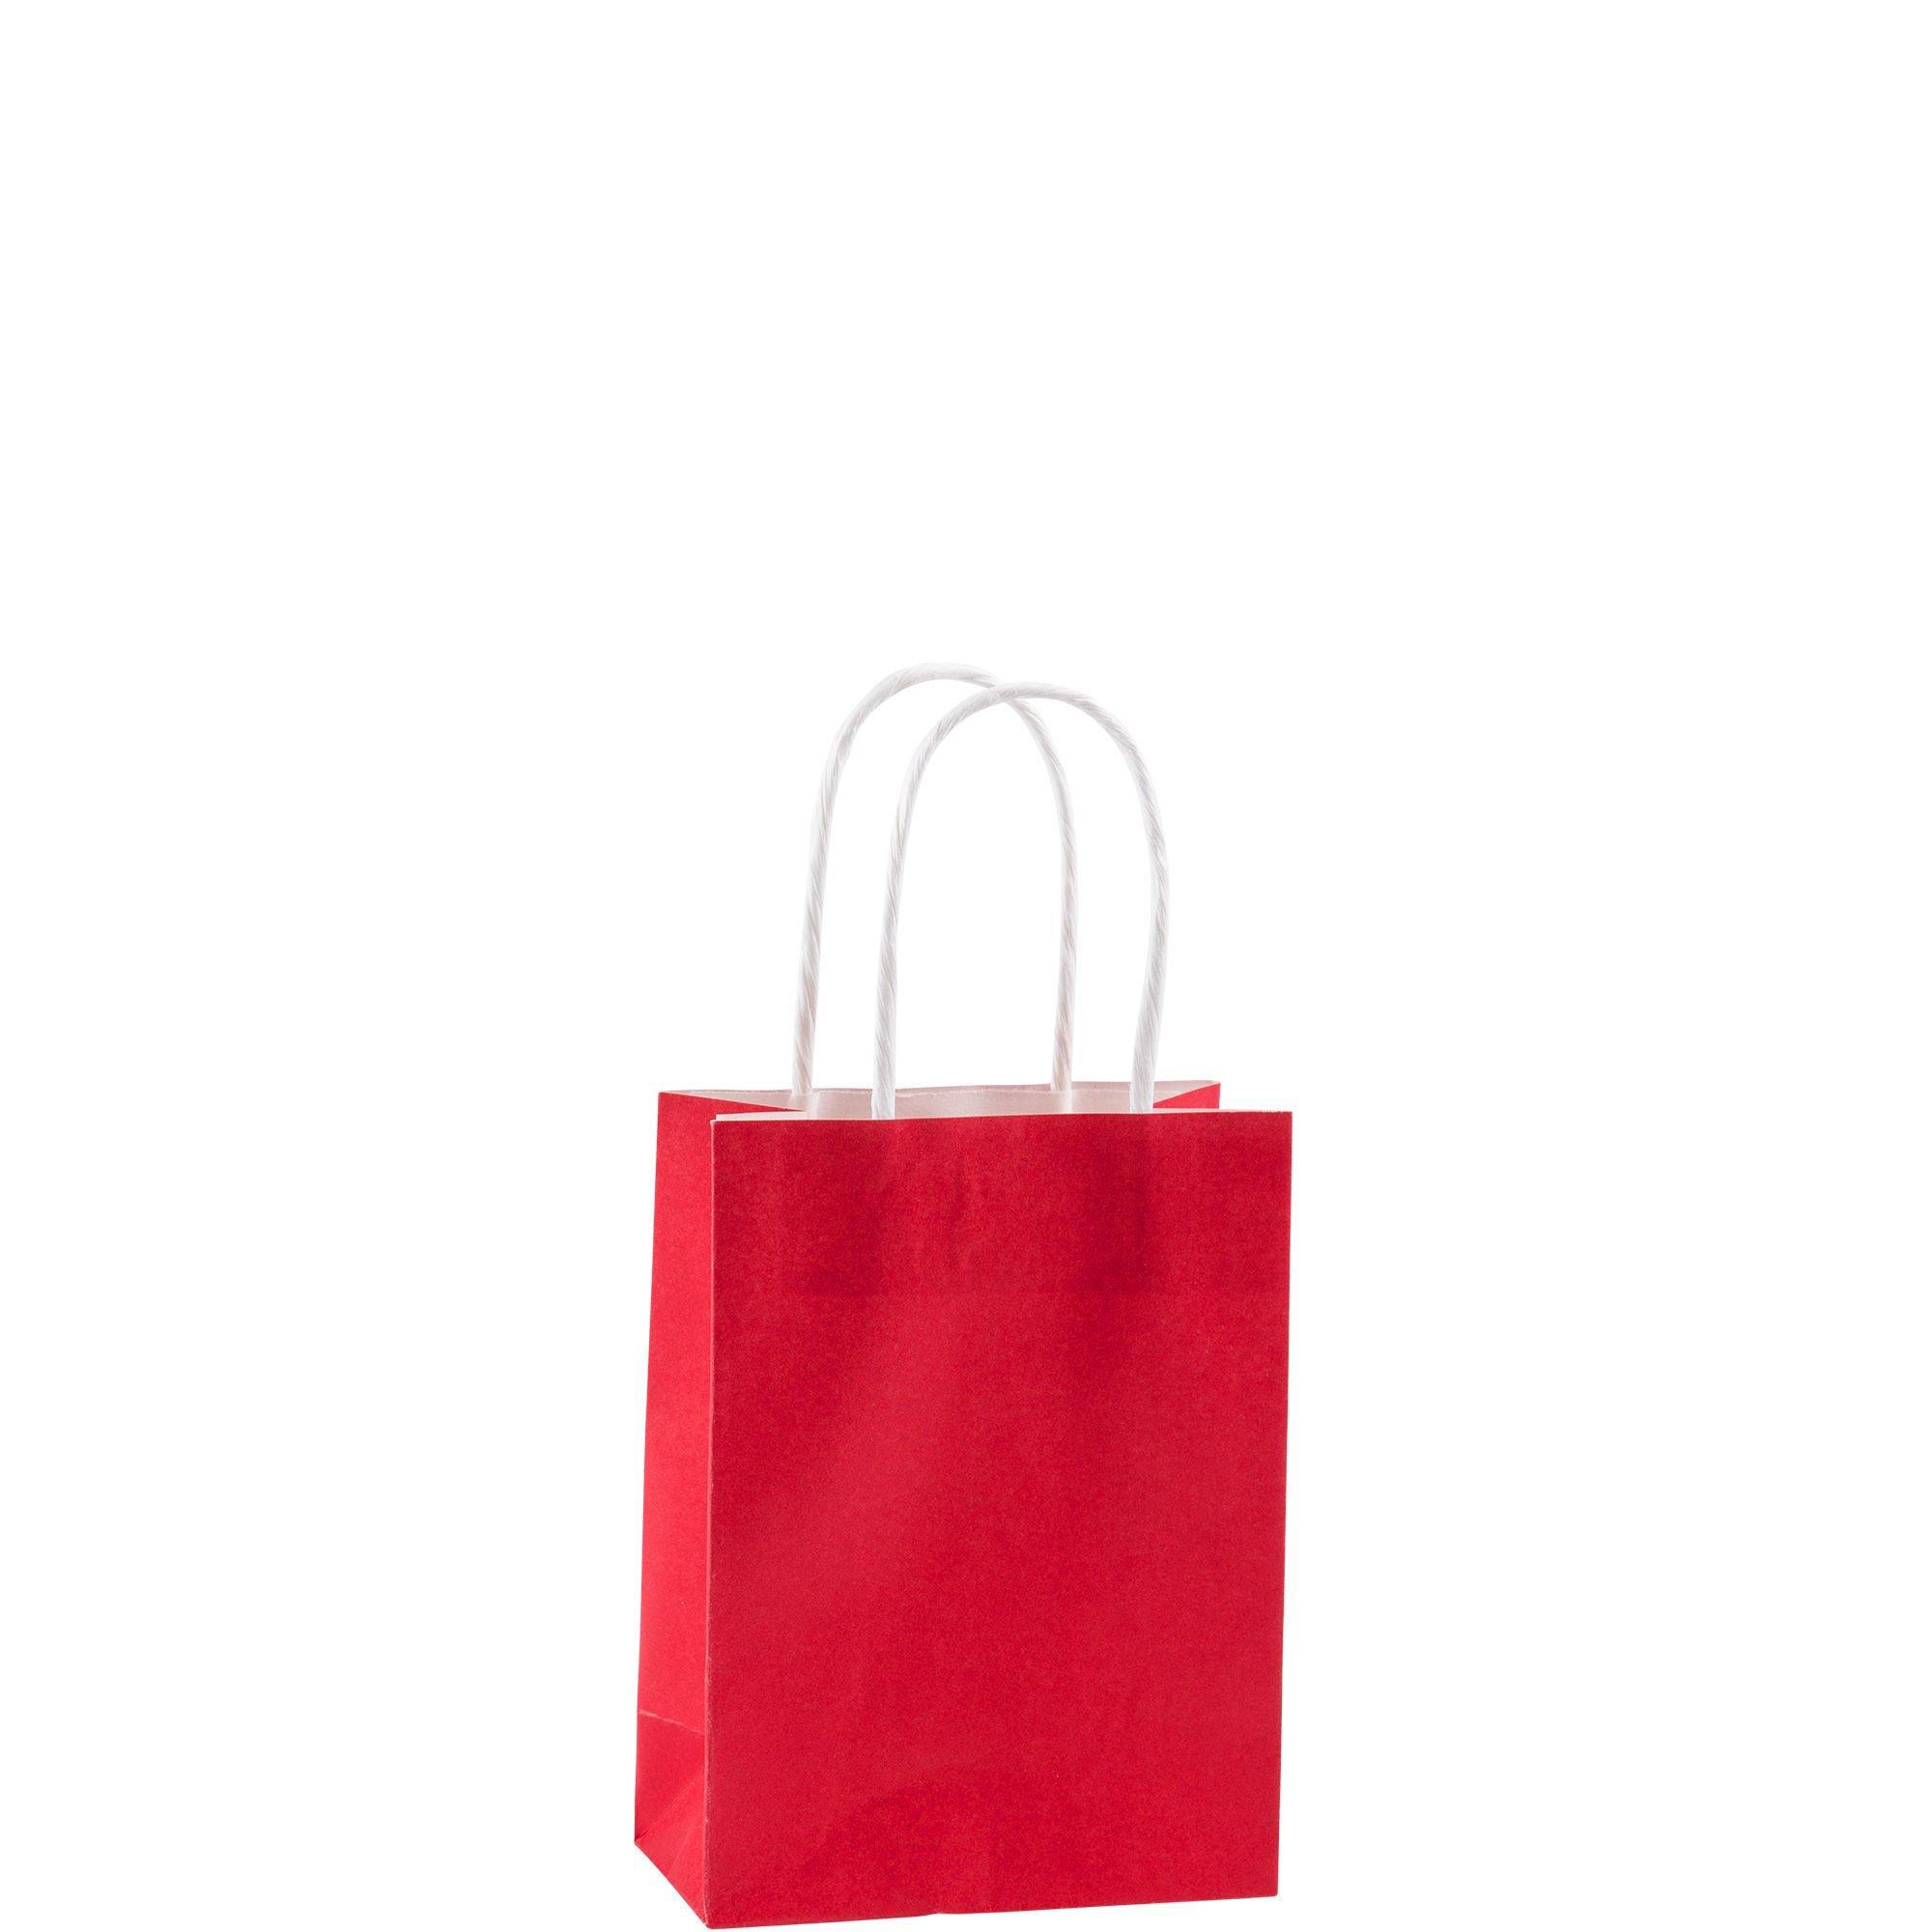 Small Shopping Bag - Red